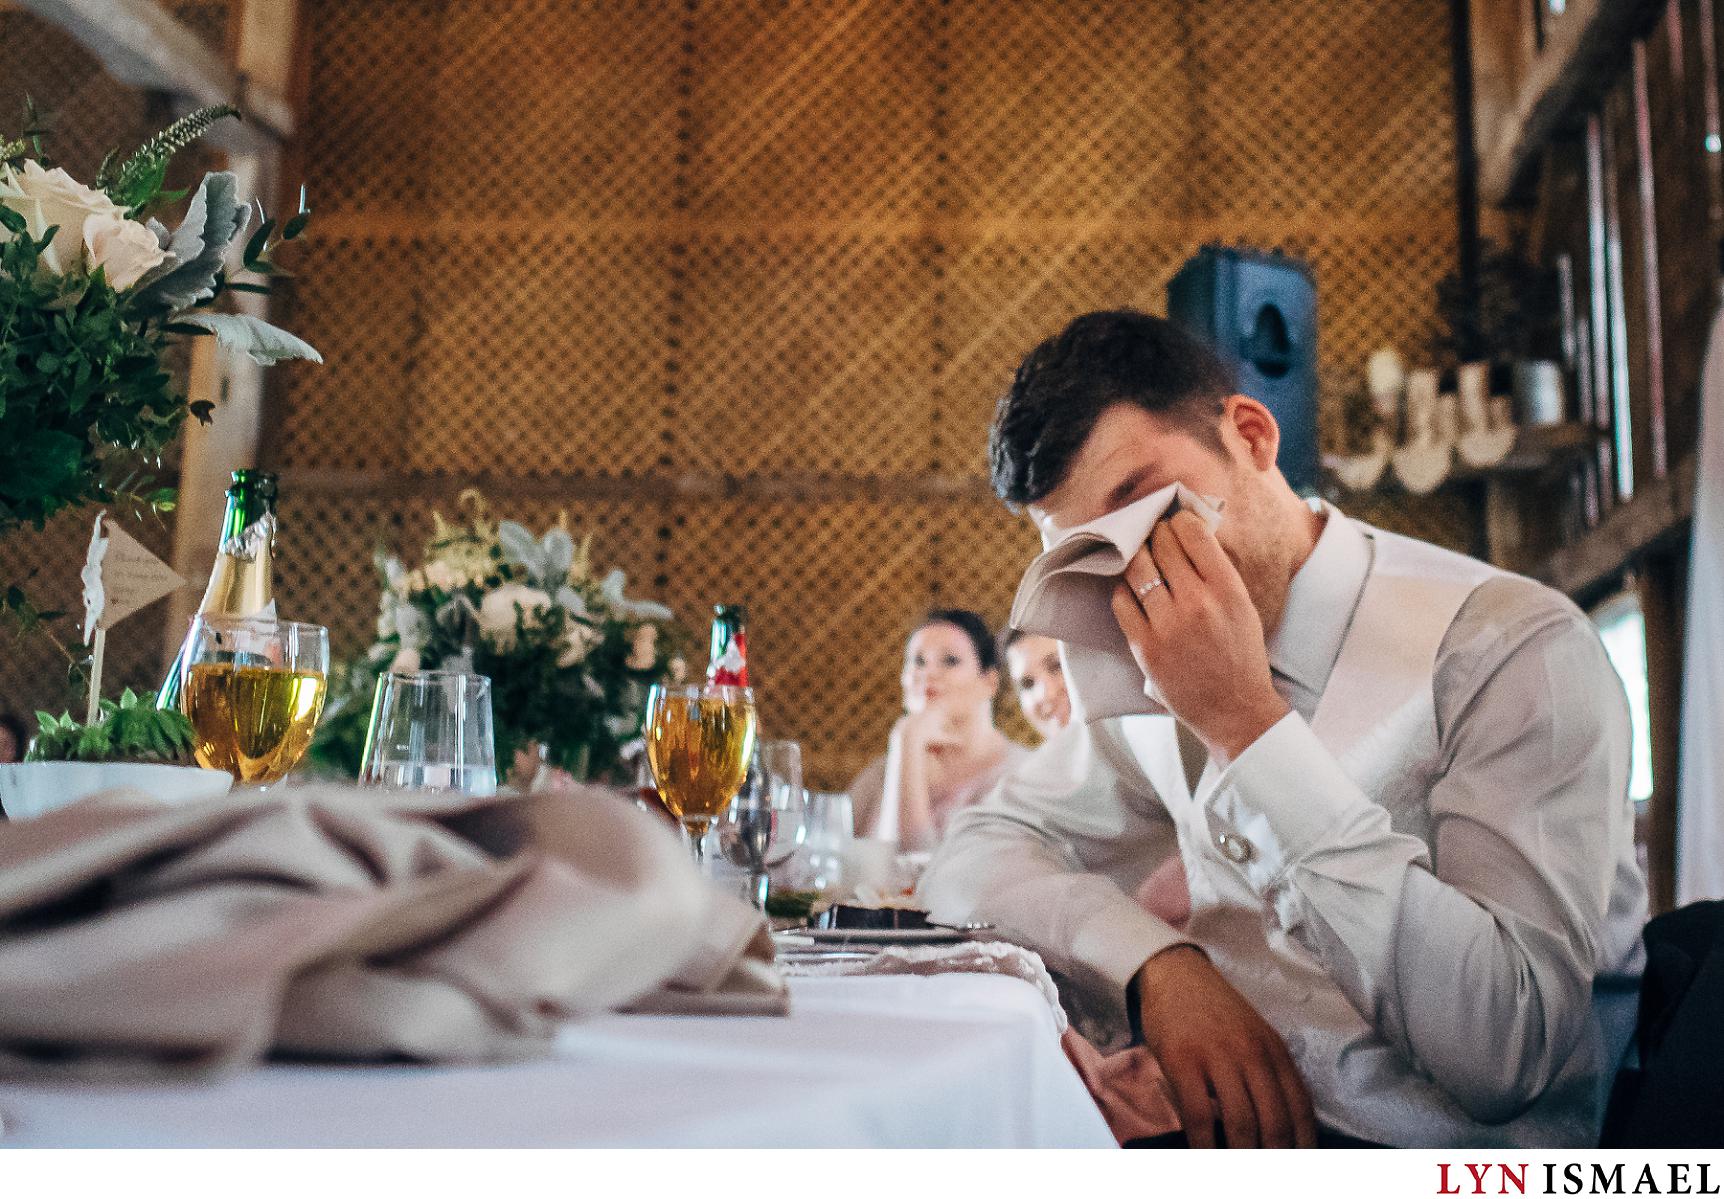 The groom cries at his wedding reception